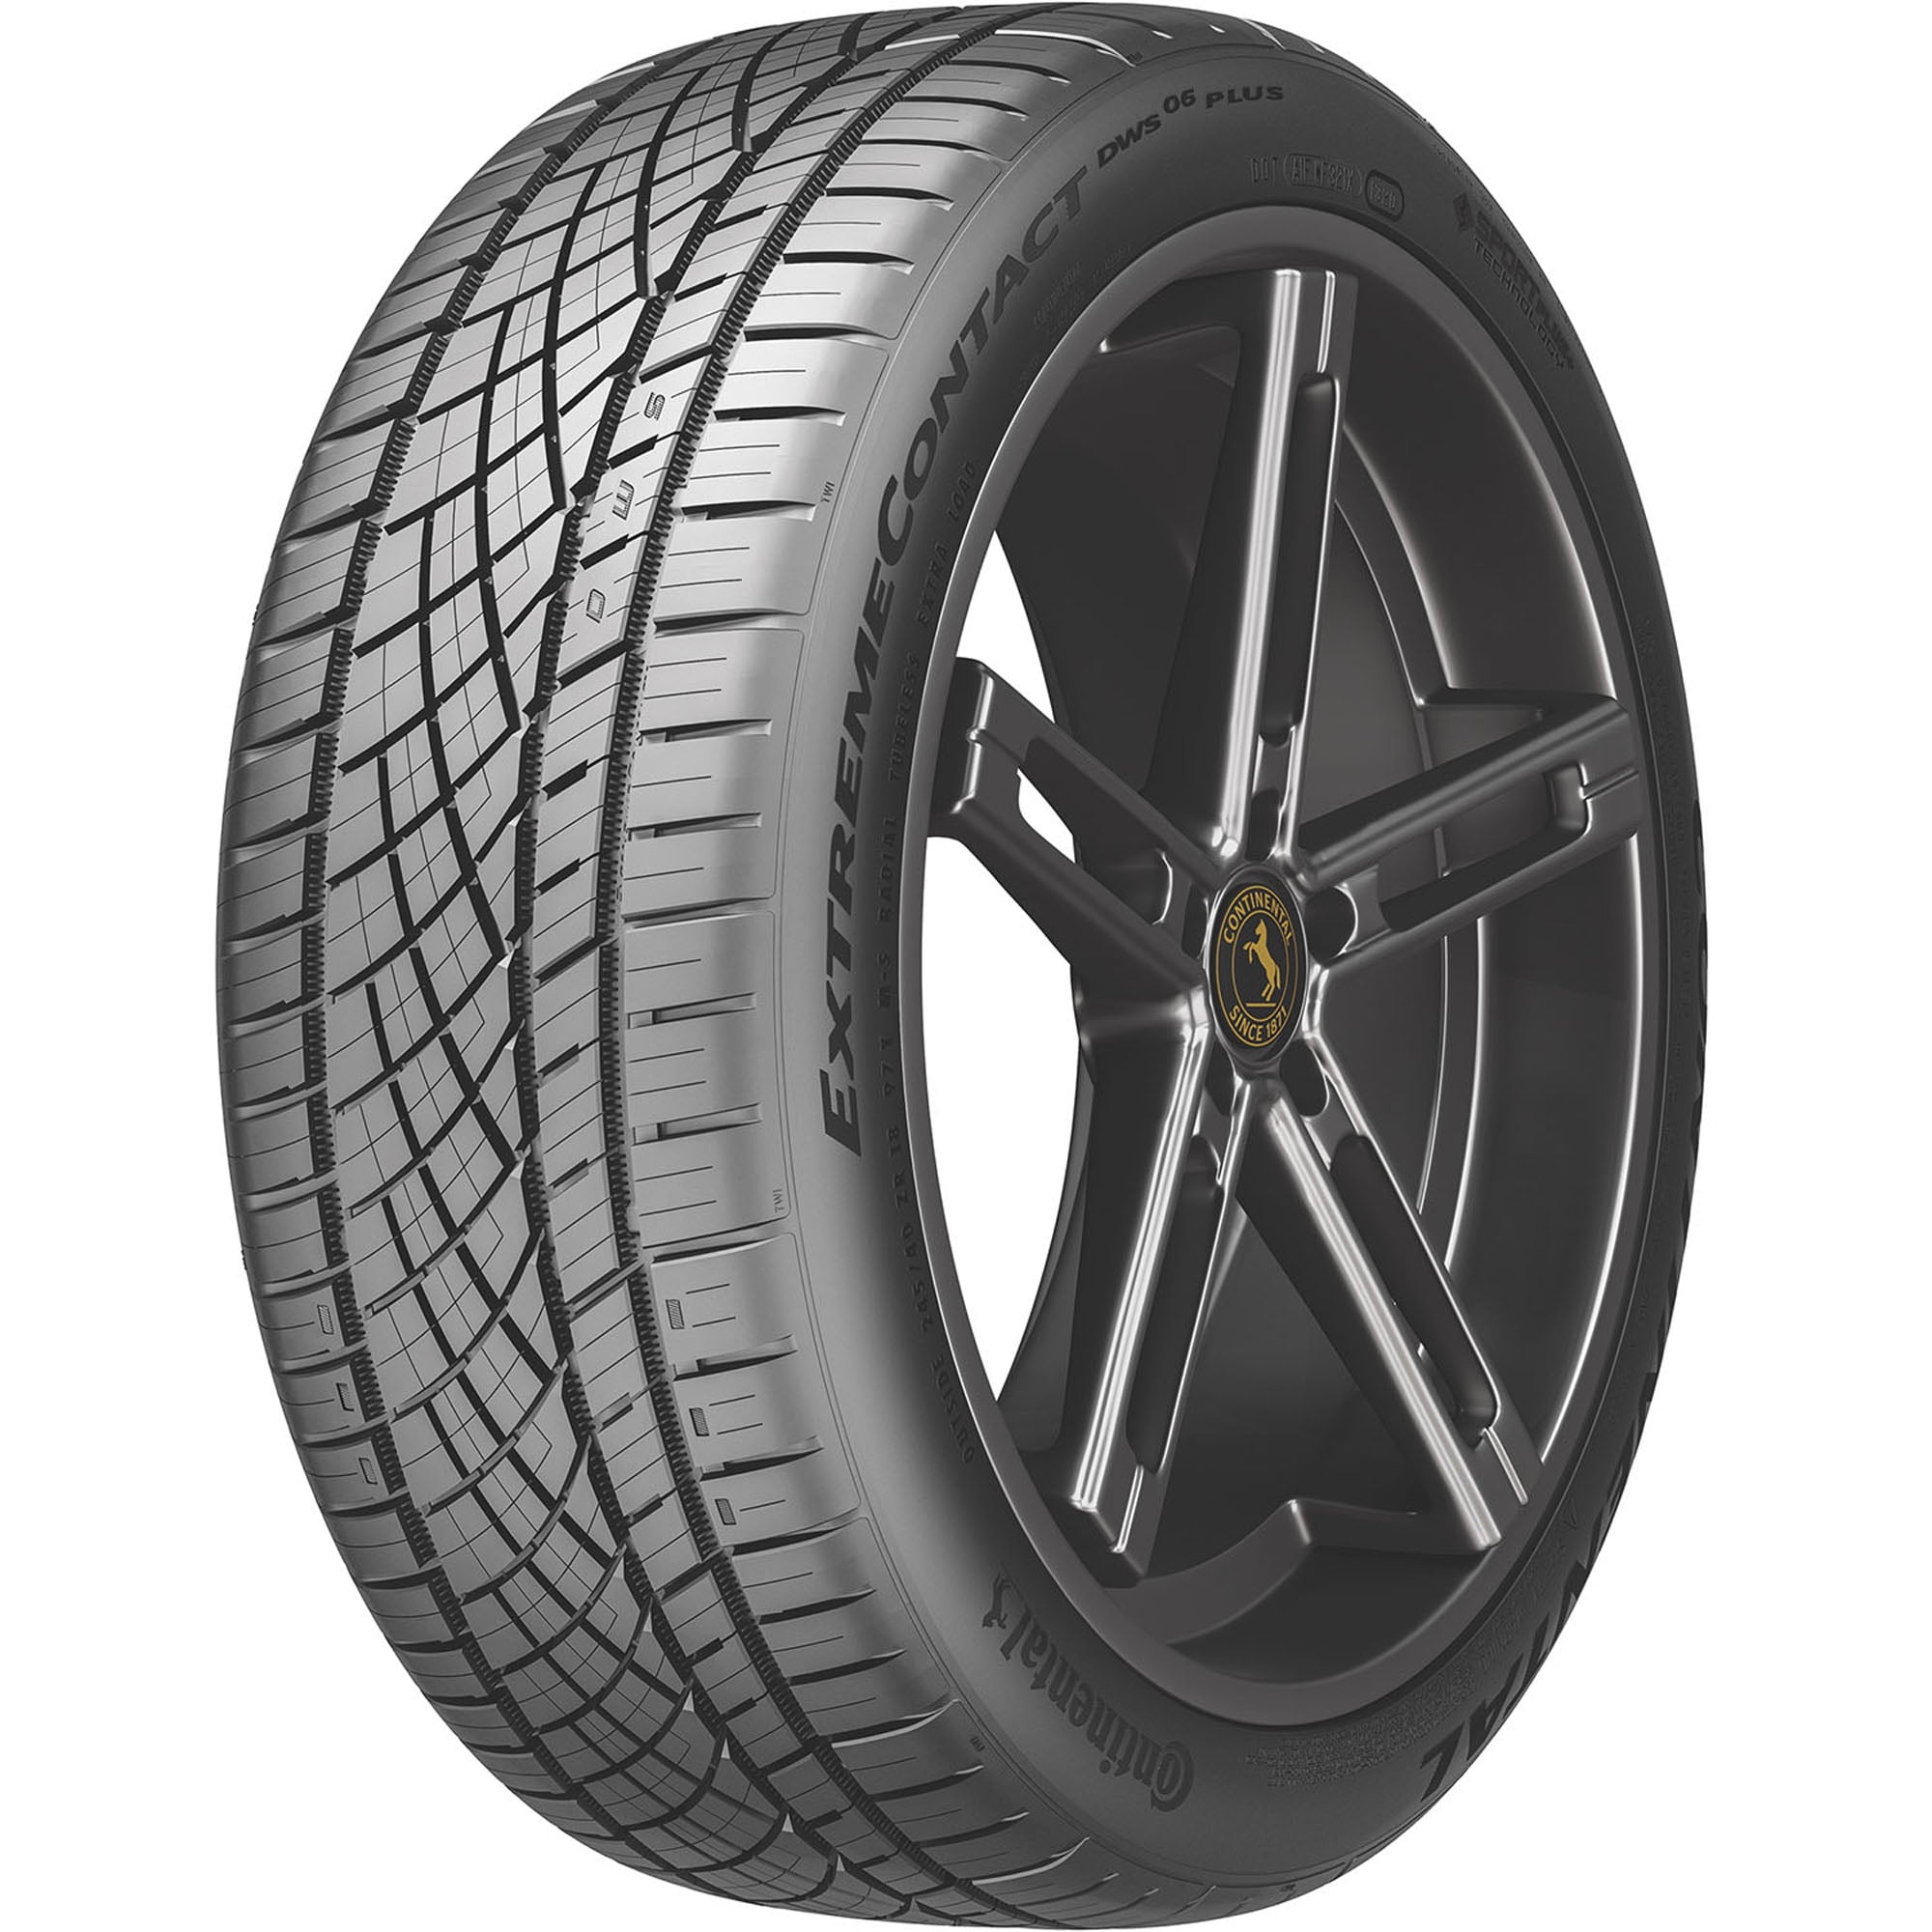 Continental ExtremeContact DWS06 PLUS All Season 245/35ZR18 92Y XL  Passenger Tire